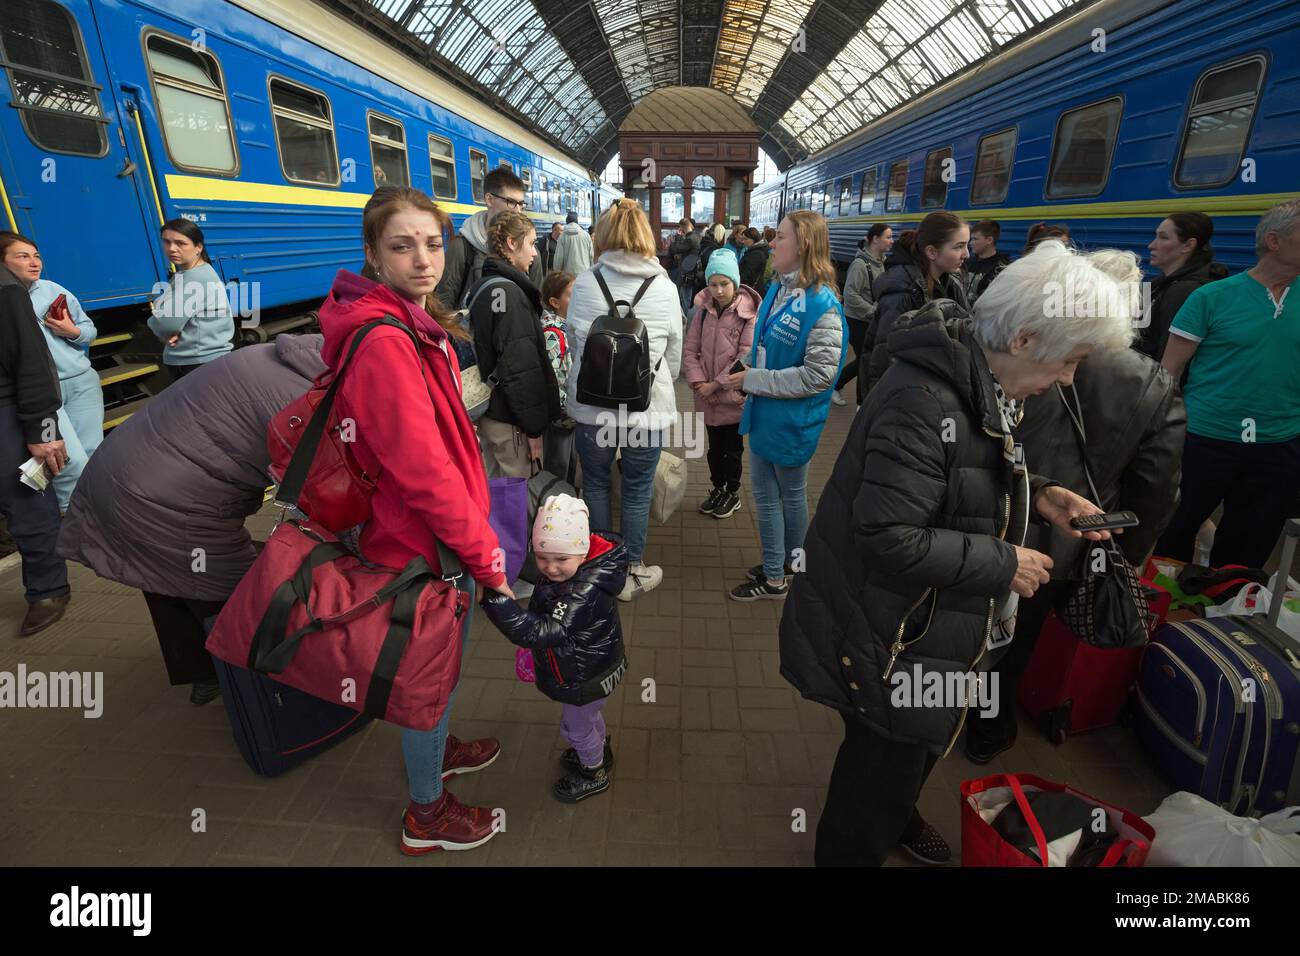 15.04.2022, Ukraine, Oblast, Lviv - Ukrainian war refugees are received and cared for by volunteers on the platform at the main train station. Attenti Stock Photo